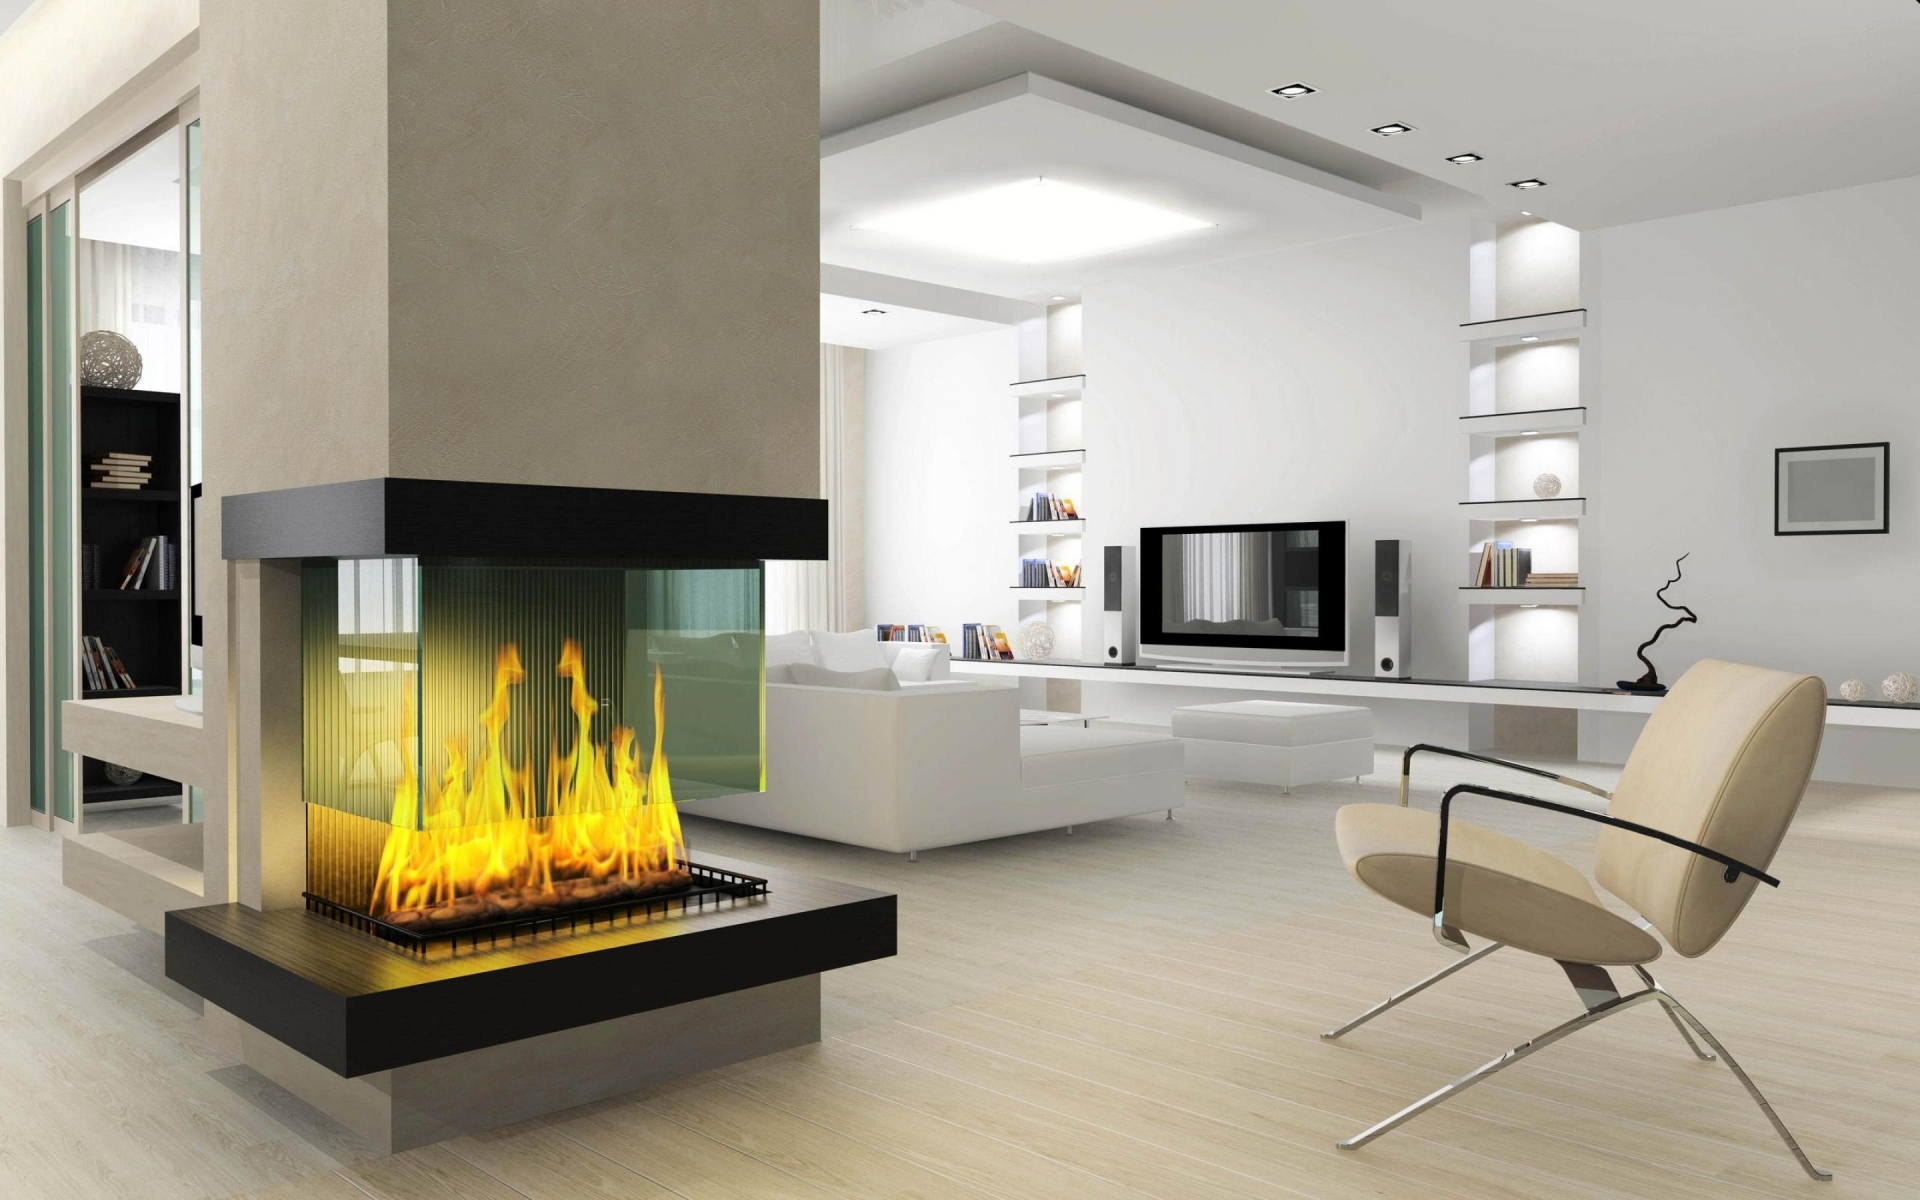 built-in fireplace in the hall